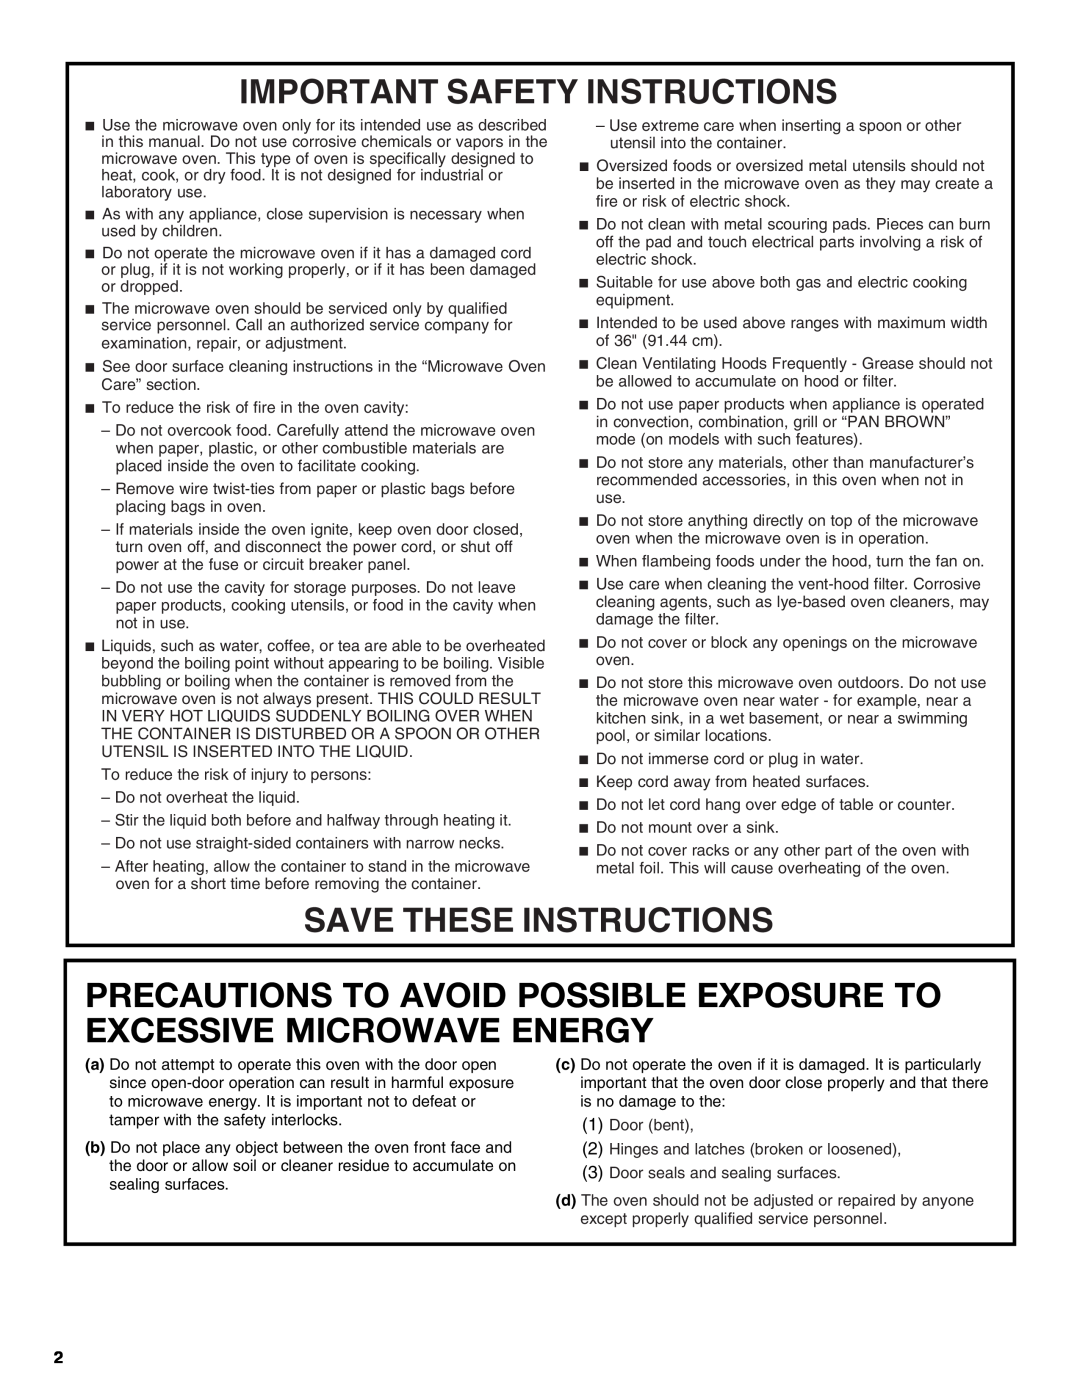 Whirlpool W10270332A Precautions To Avoid Possible Exposure To Excessive Microwave Energy, Important Safety Instructions 